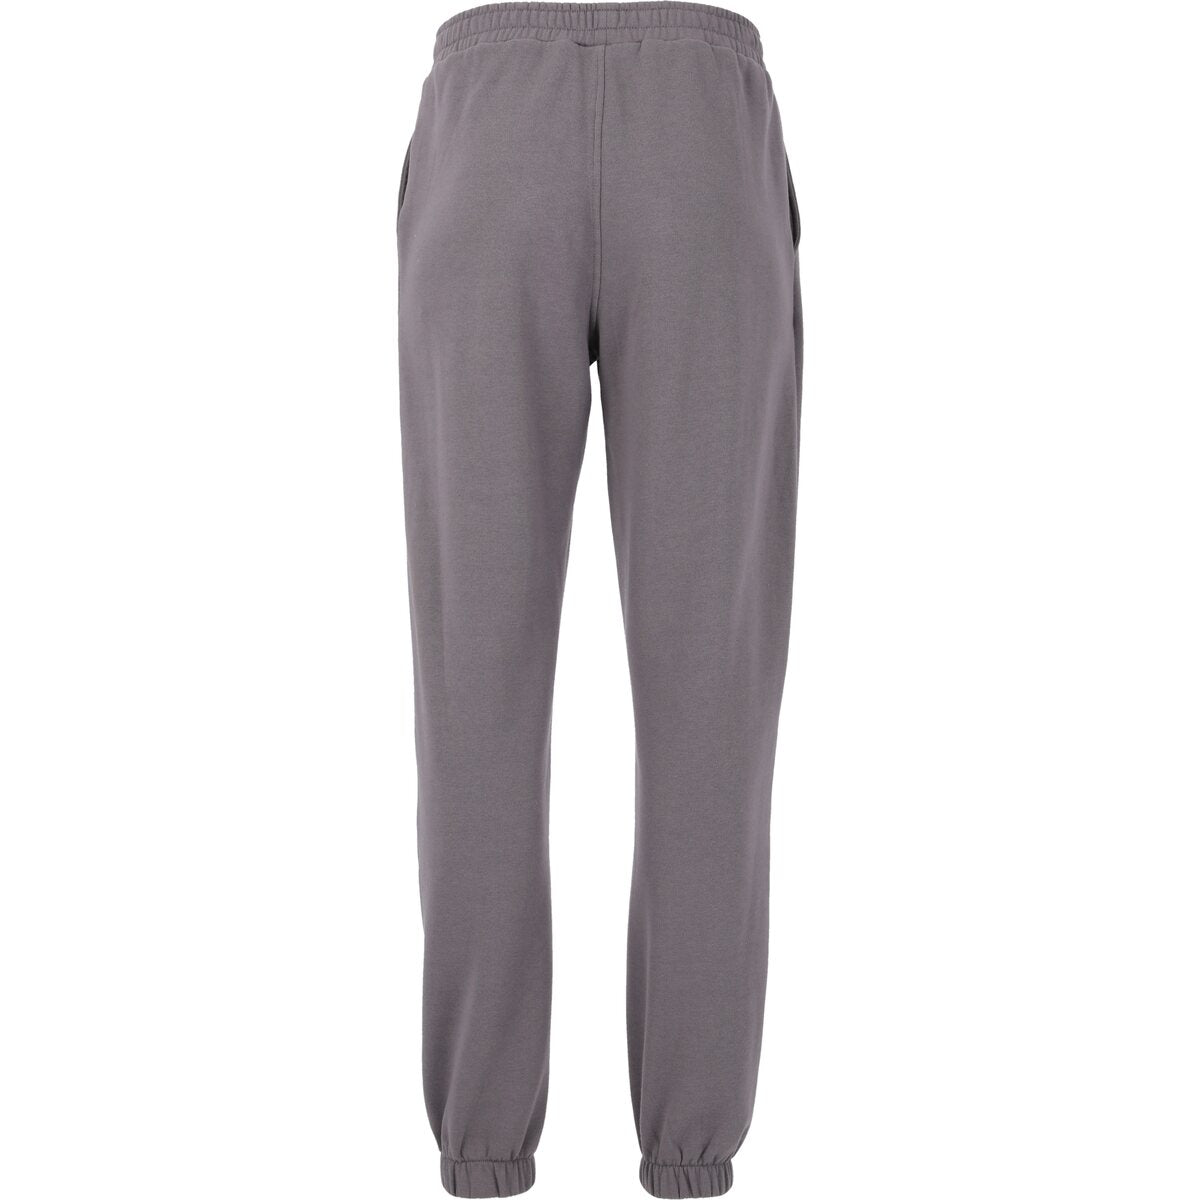 Athlecia Ruthie Womenswear Sweat Pants 7 Shaws Department Stores